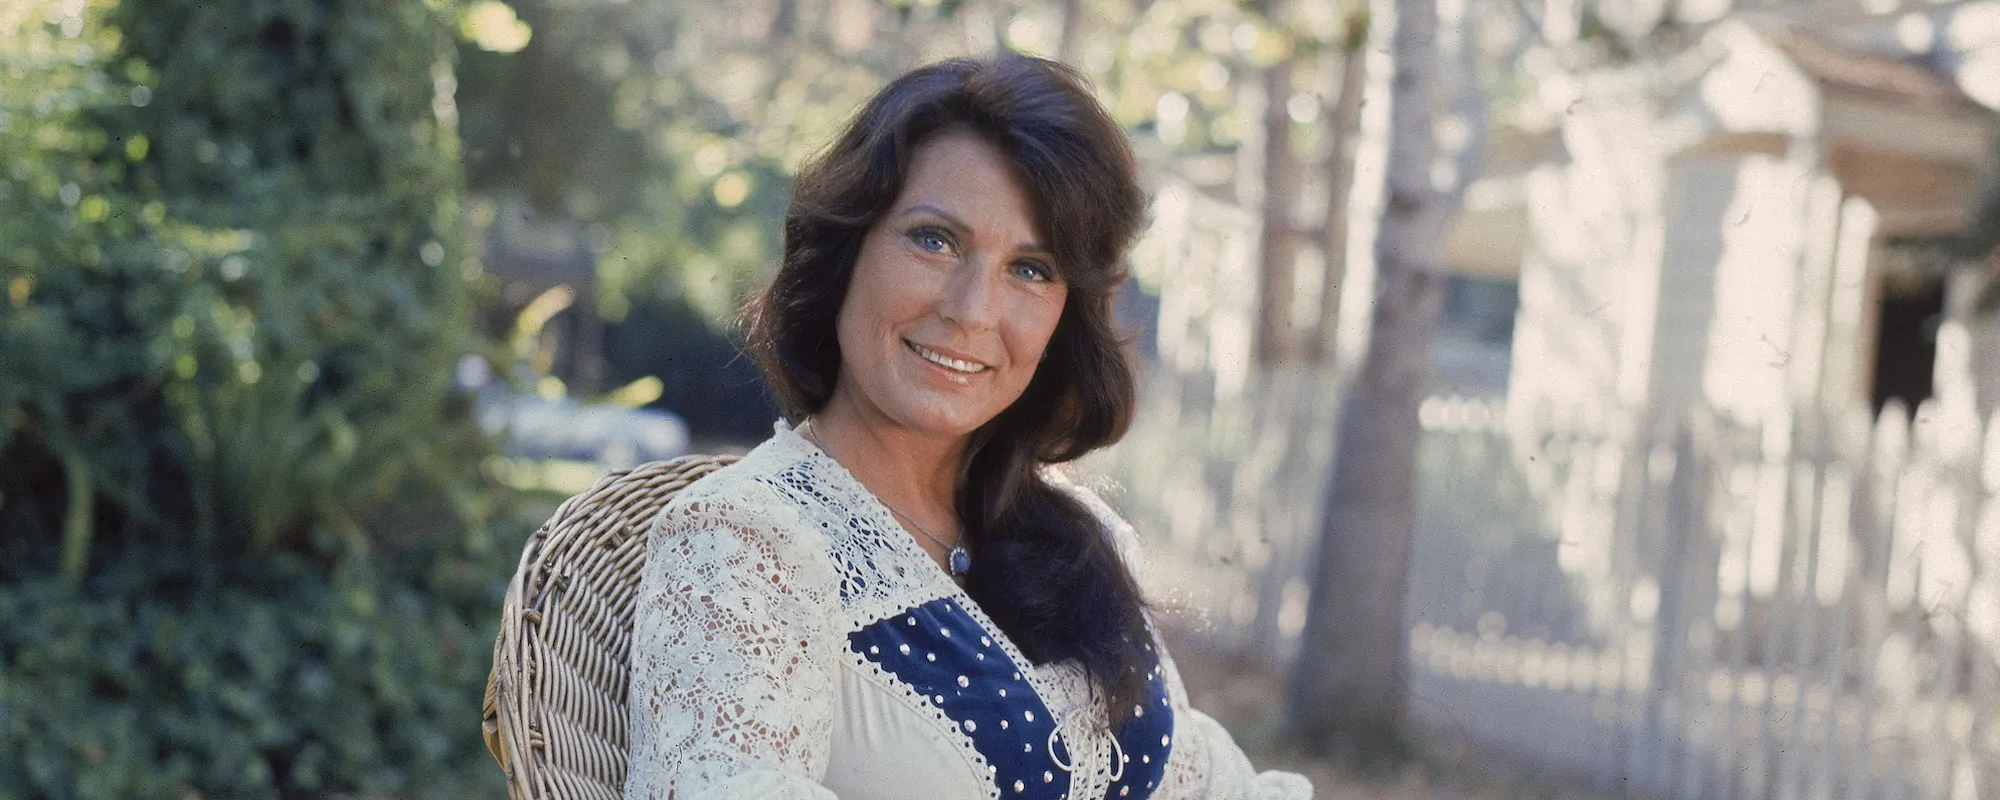 The Non-Risqué Meaning Behind One of Loretta Lynn’s Banned Songs “X Rated”